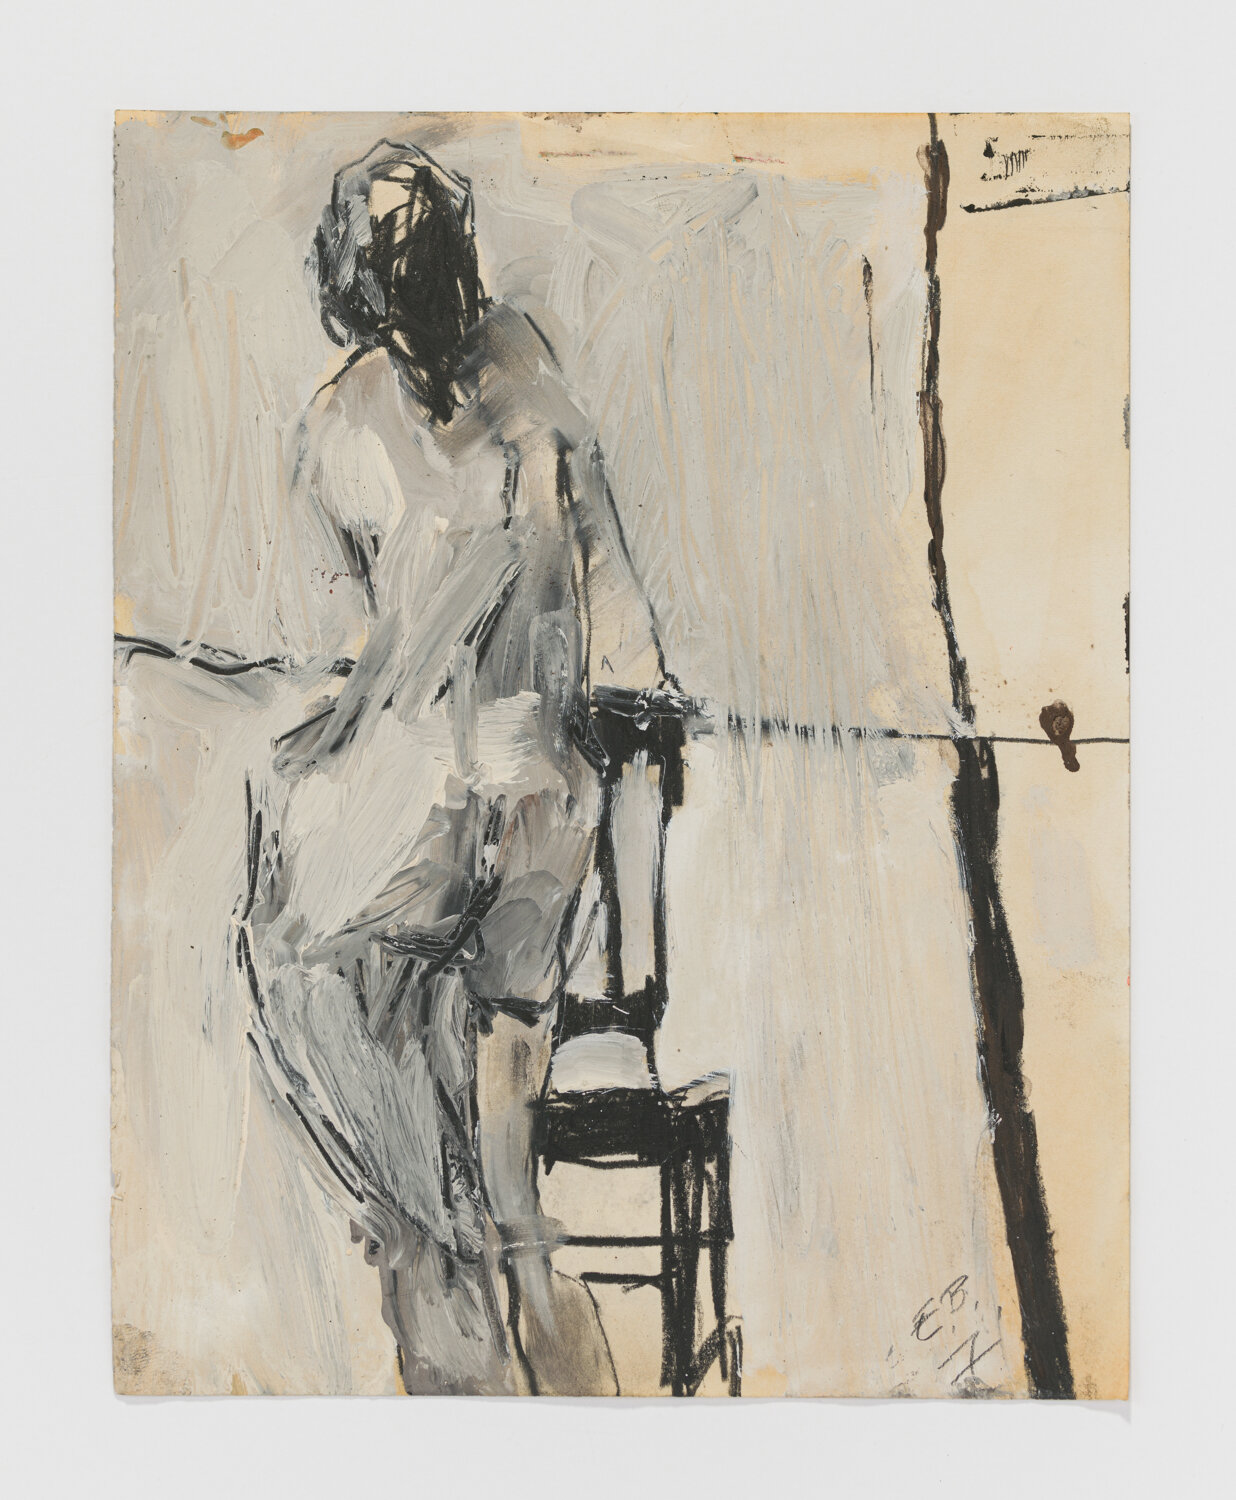   Untitled (figure 1) , 1958 - 1965 graphite and paint on paper 11 x 8.5" paper 19.5 x 15.75" framed 